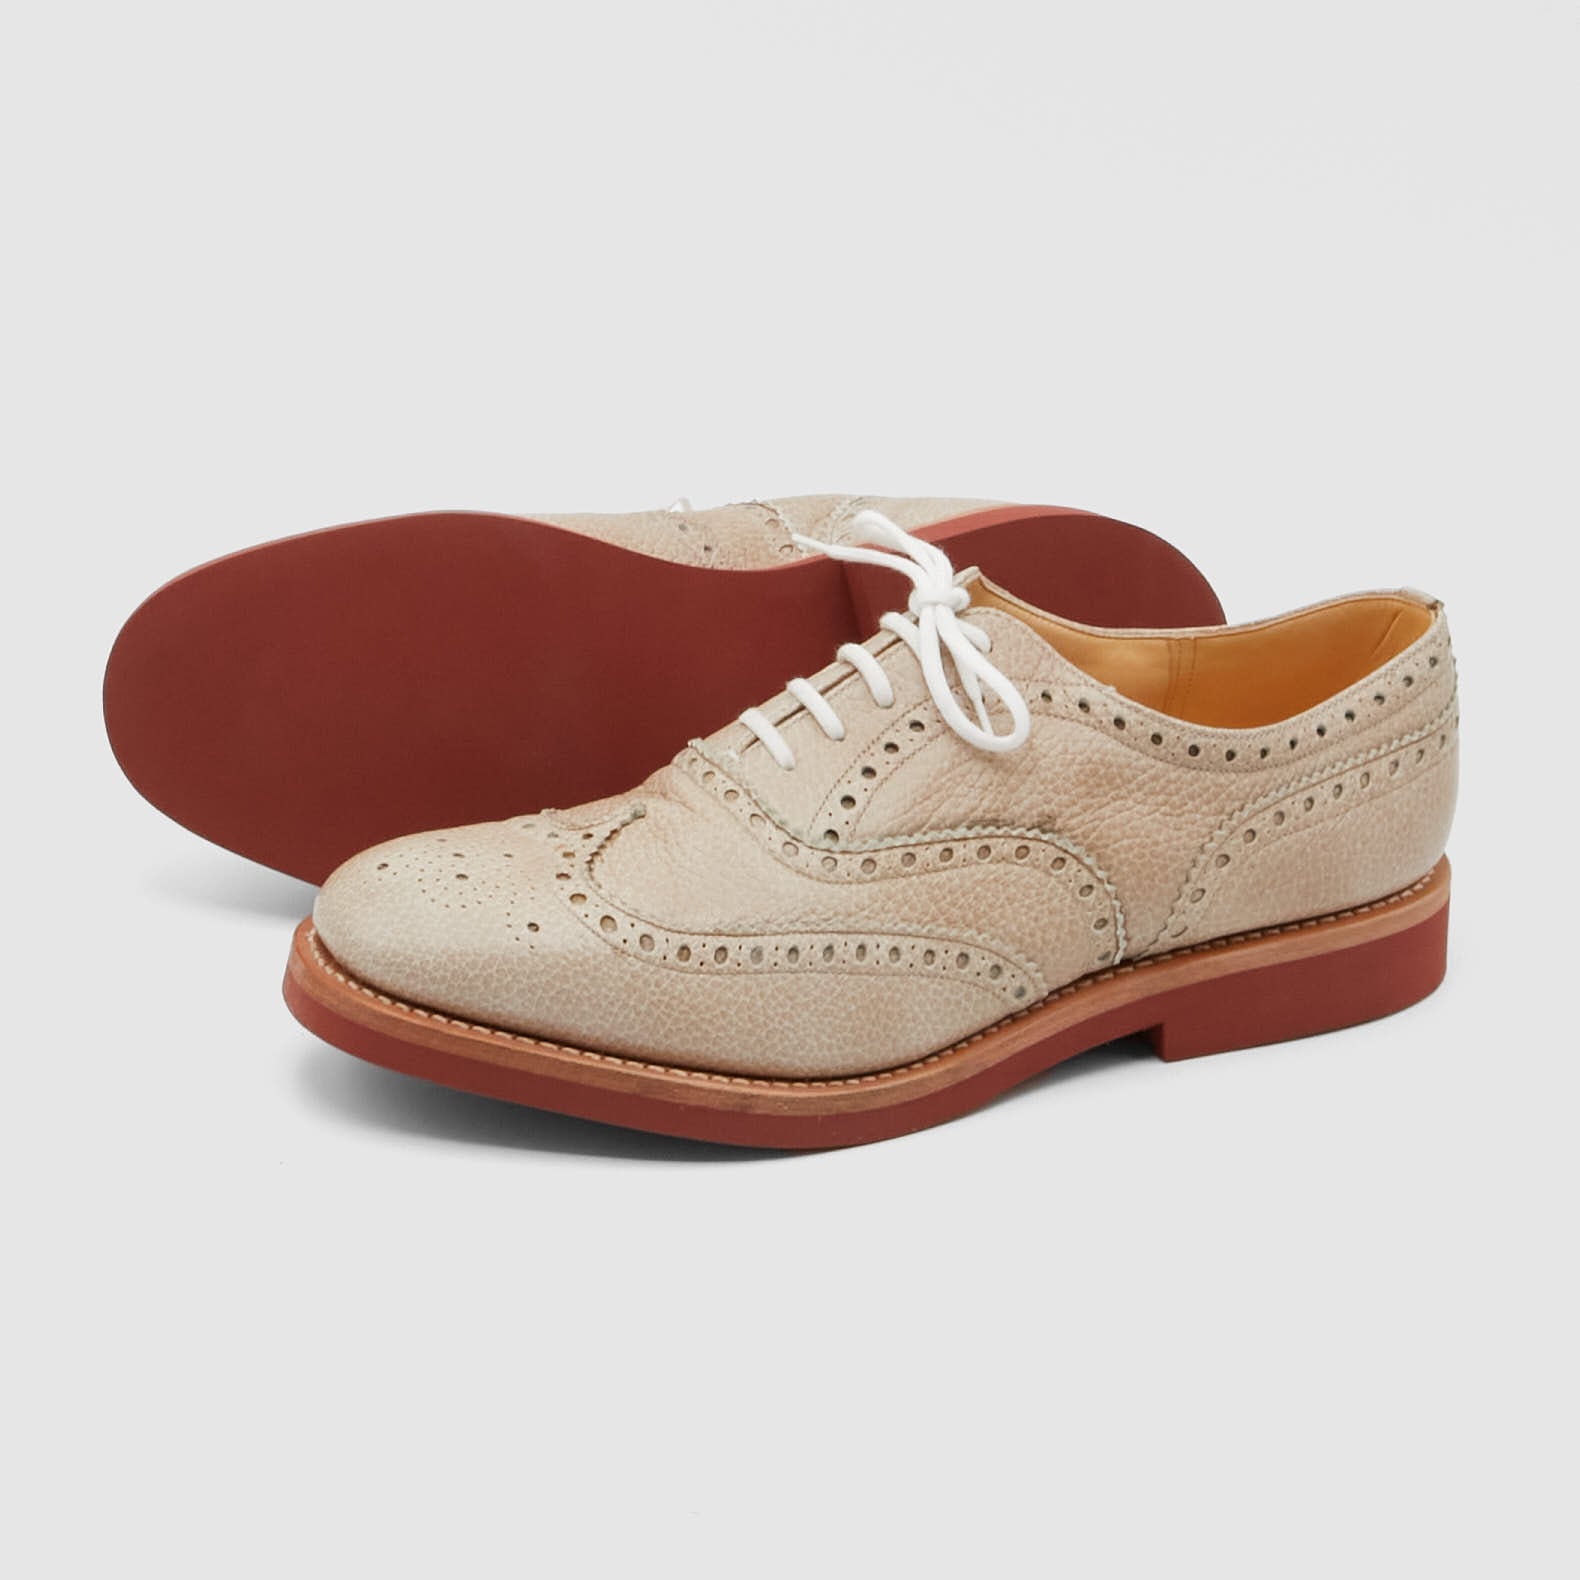 Church's Ladies Burwood Brogues Lace-up Oxford Shoe - DeeCee style